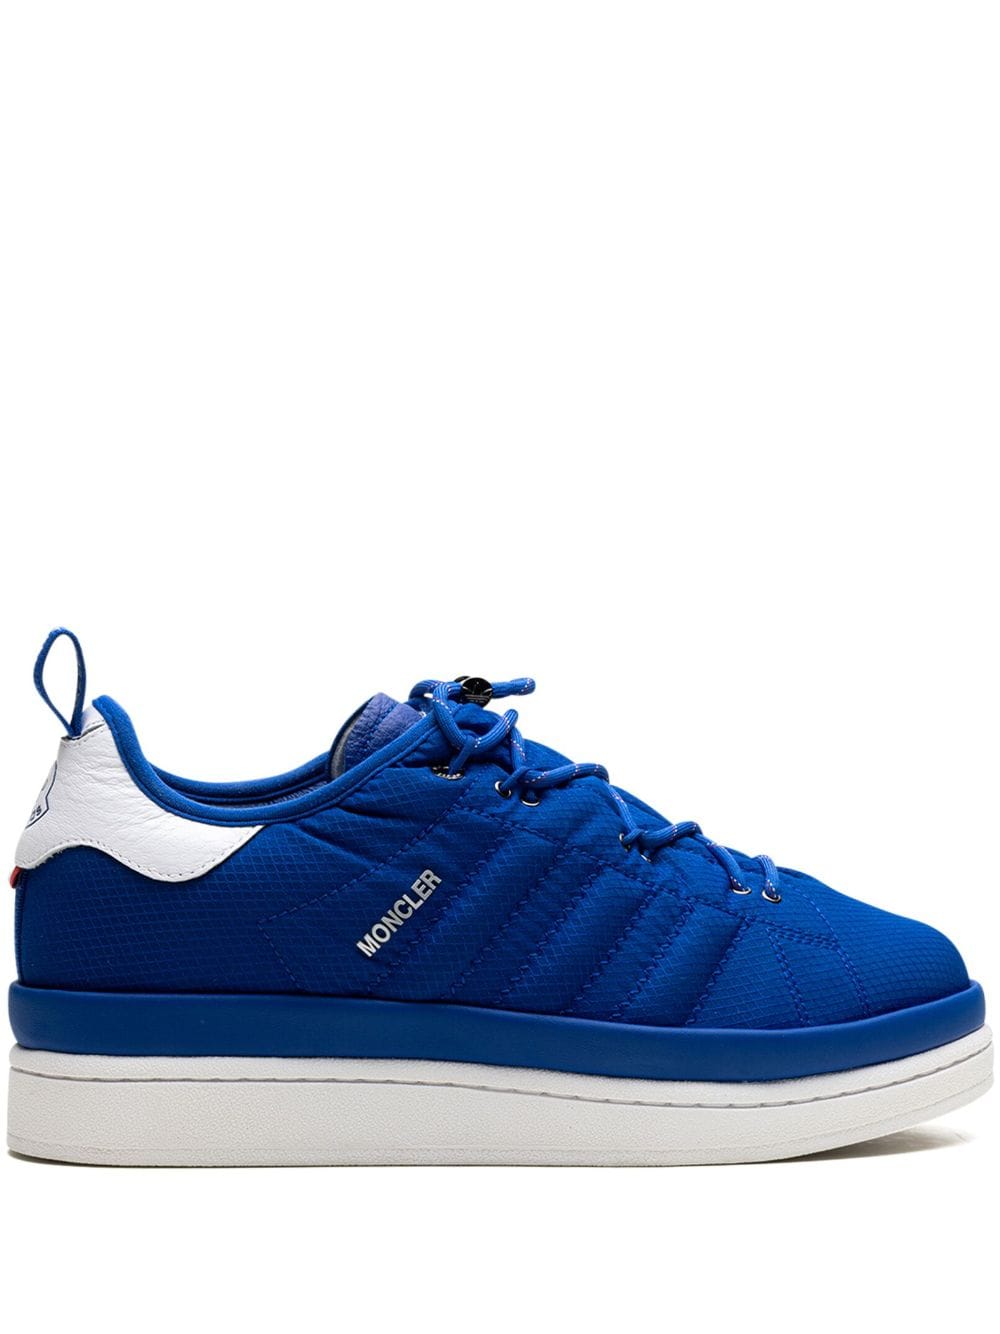 Adidas x Moncler Campus "Royal Blue" sneakers